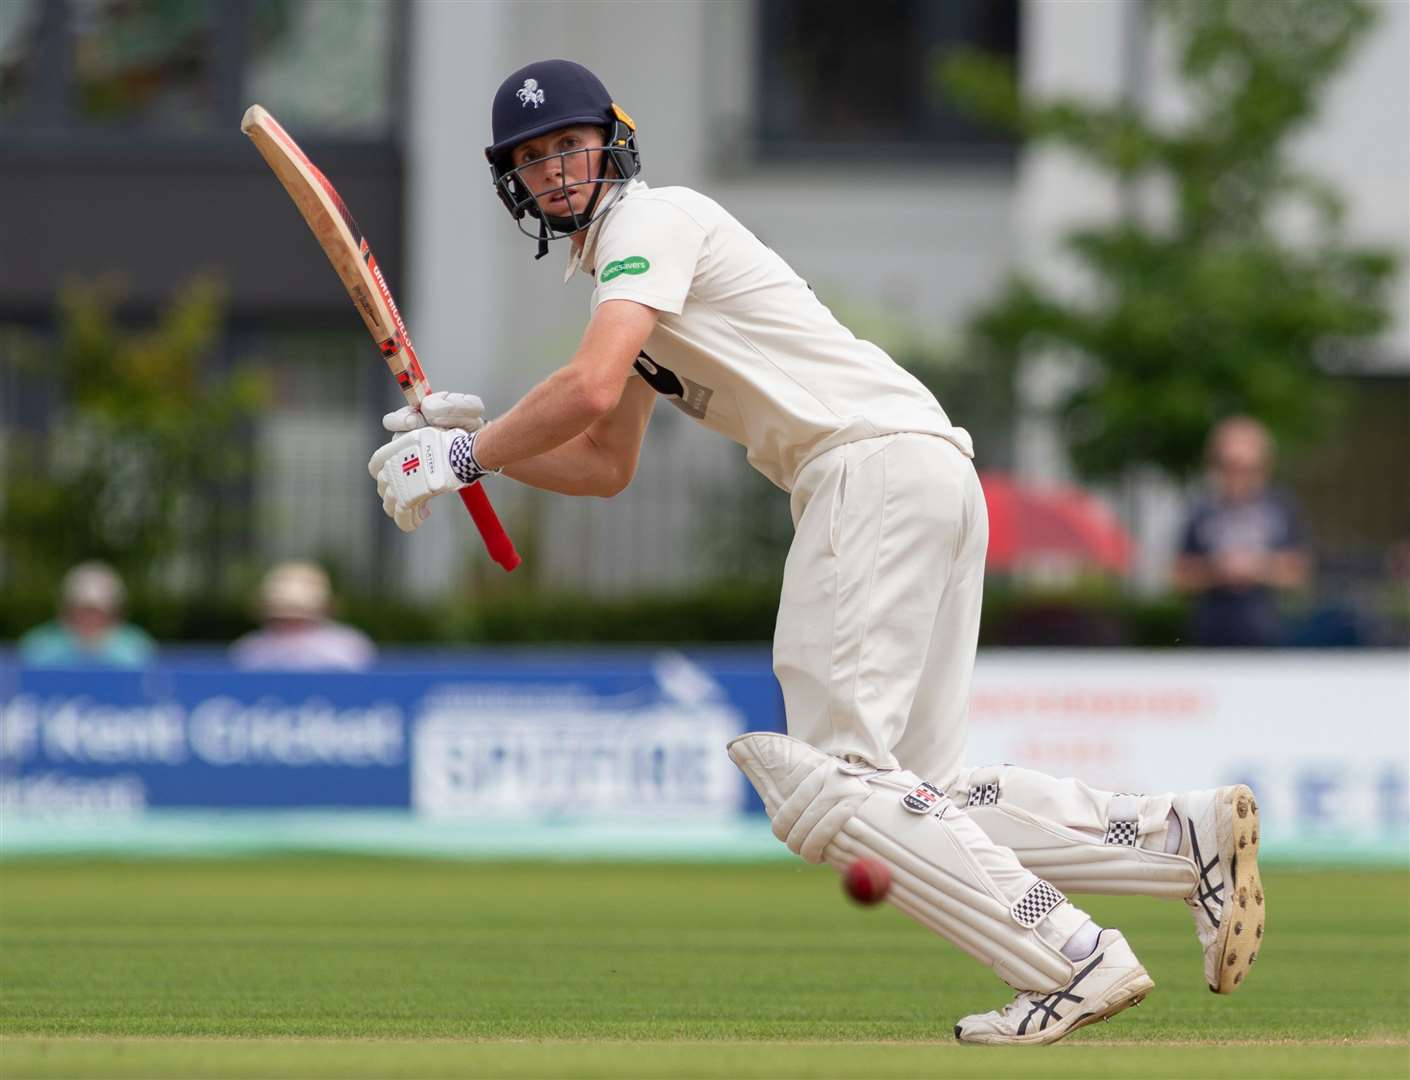 Kent's Zak Crawley has been asked to train as part of a 55-man England squad